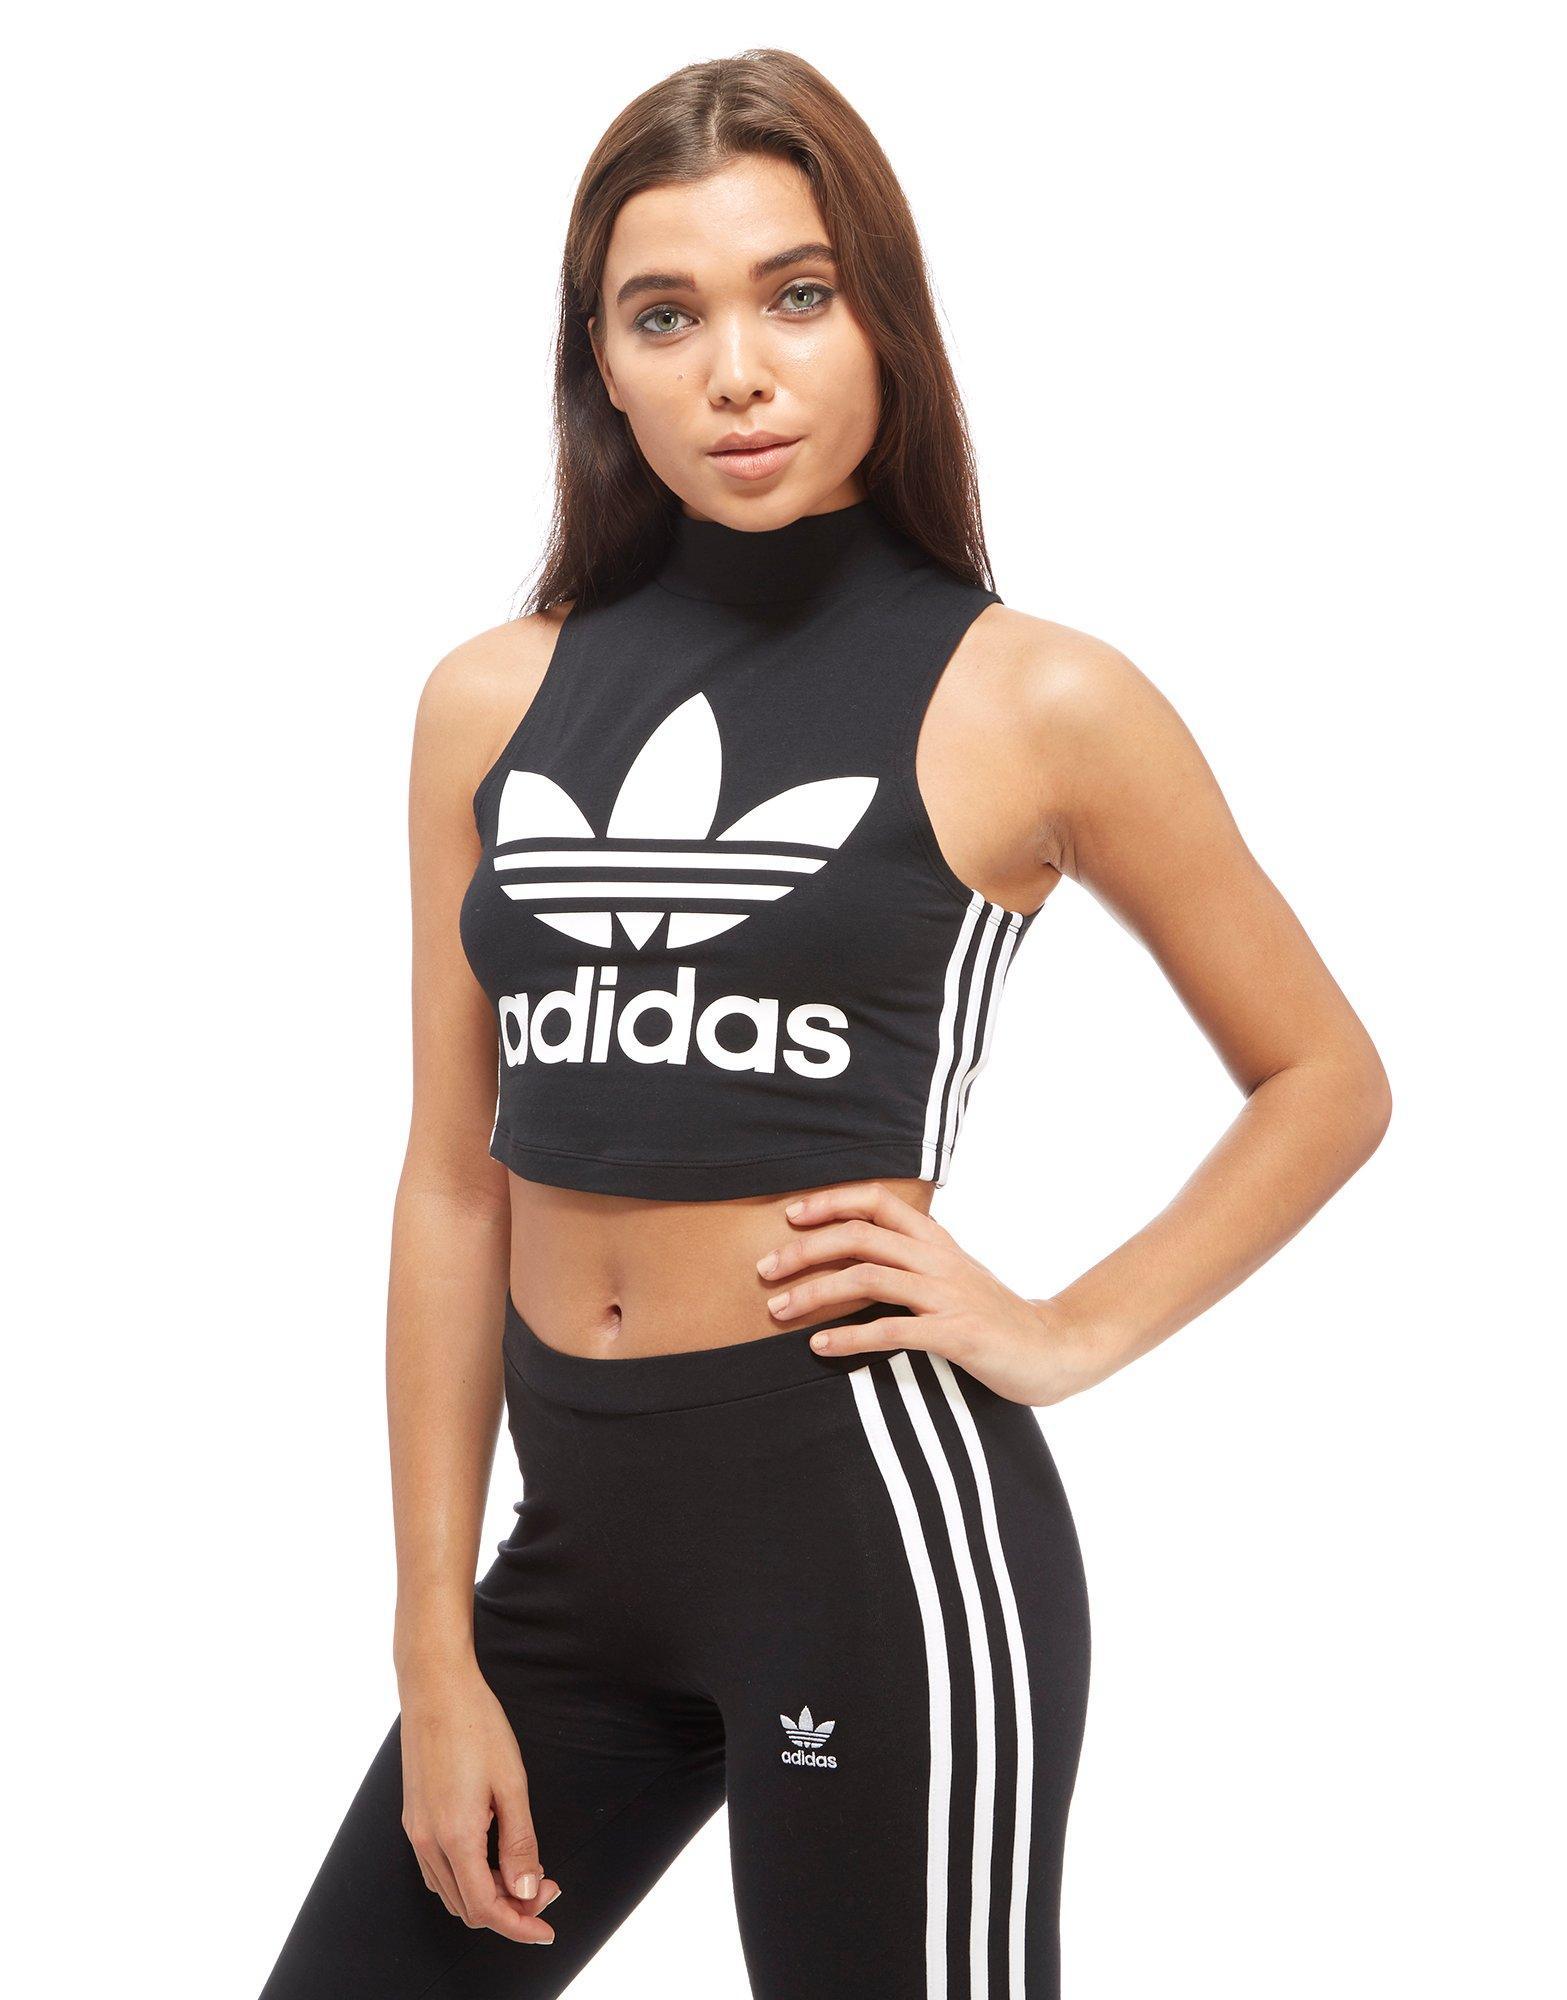 Lyst - Adidas Originals Cropped High Neck Tank Top in Black